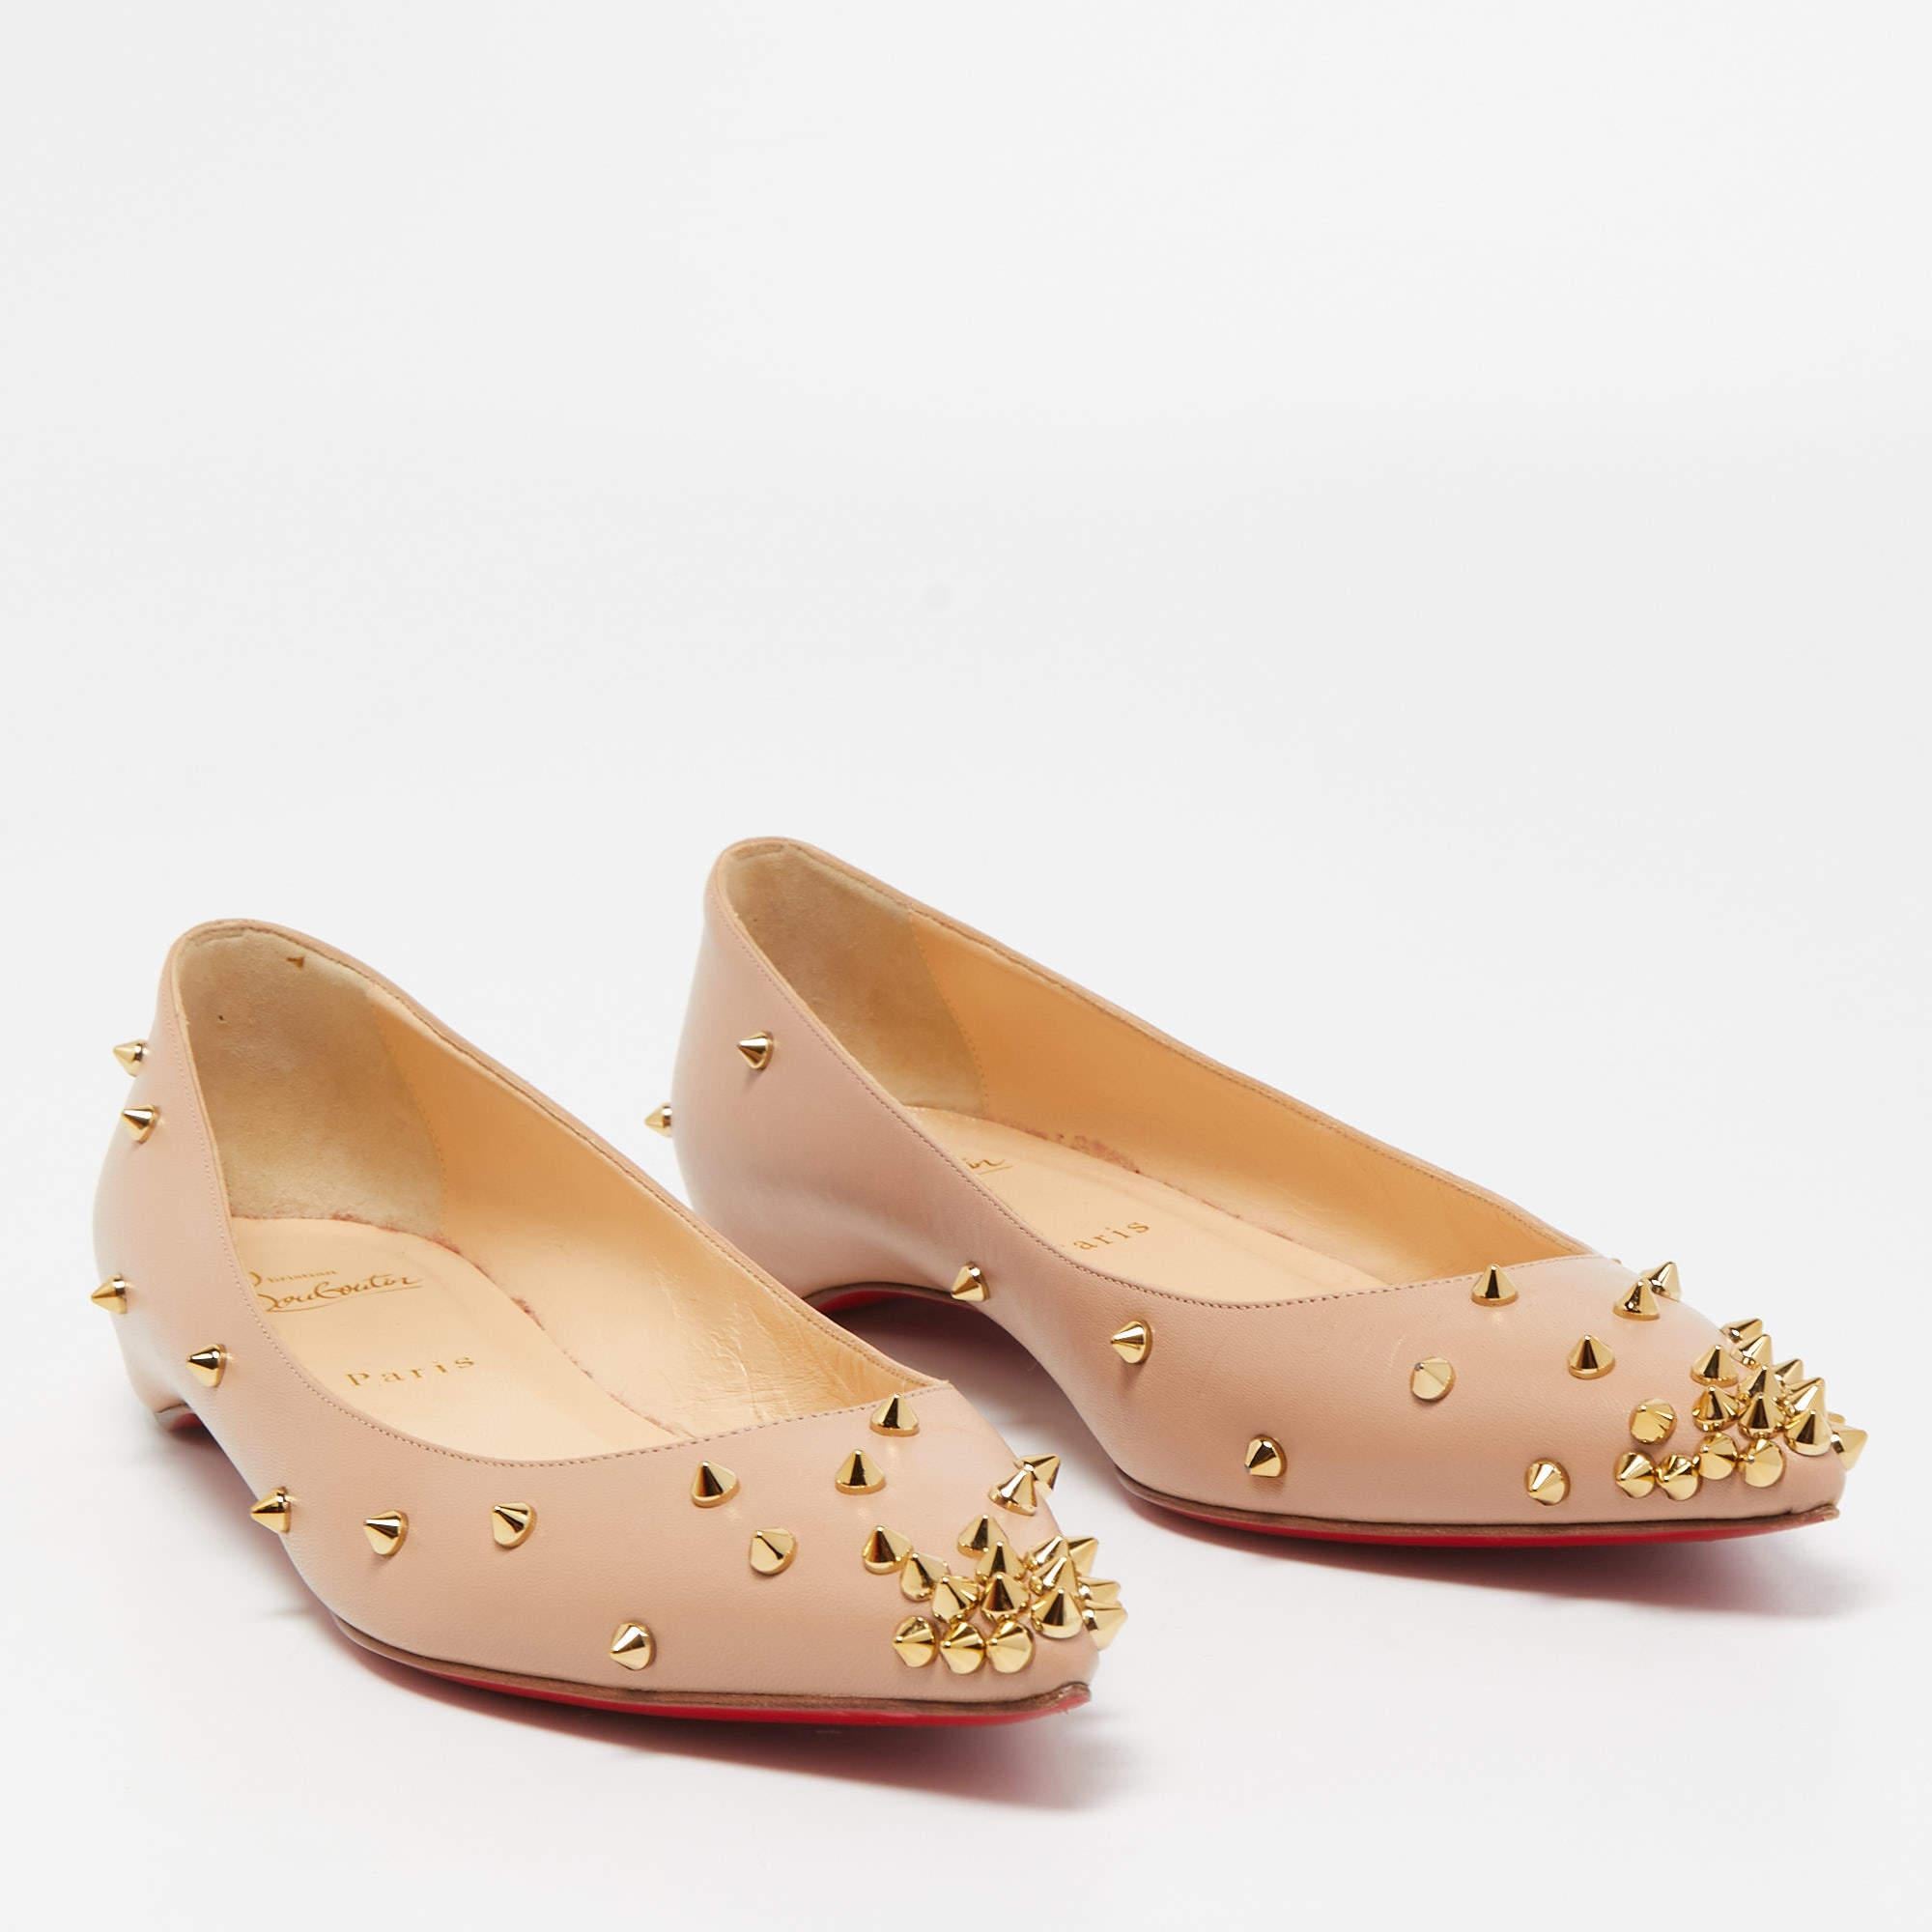 Christian Louboutin Beige Leather Degraspike Pointed Toe Ballet Flats Size 40.5 1